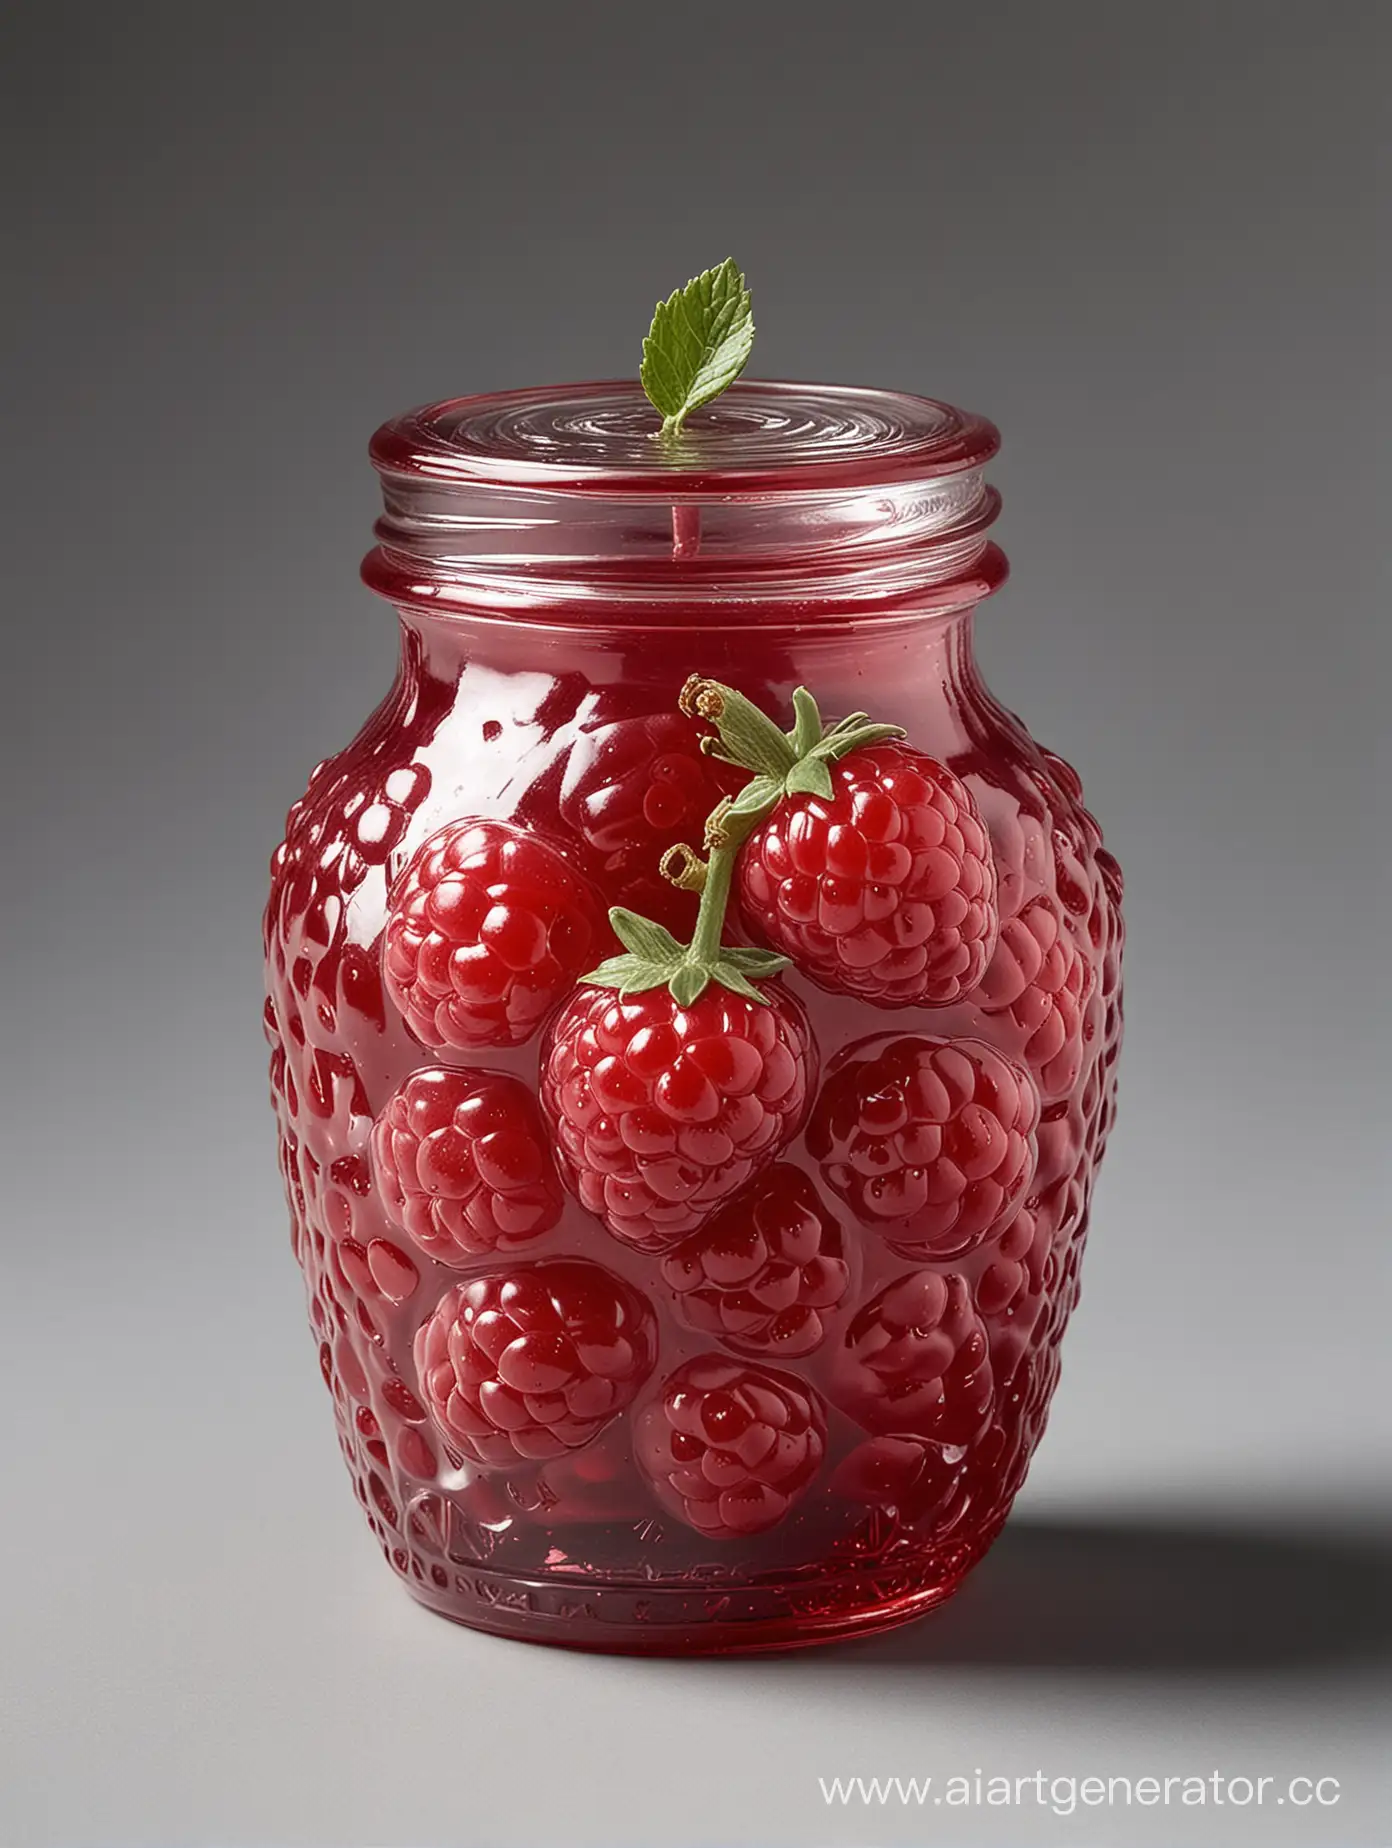 Raspberryshaped-Jar-Exquisite-Ceramic-Container-for-Culinary-Delights